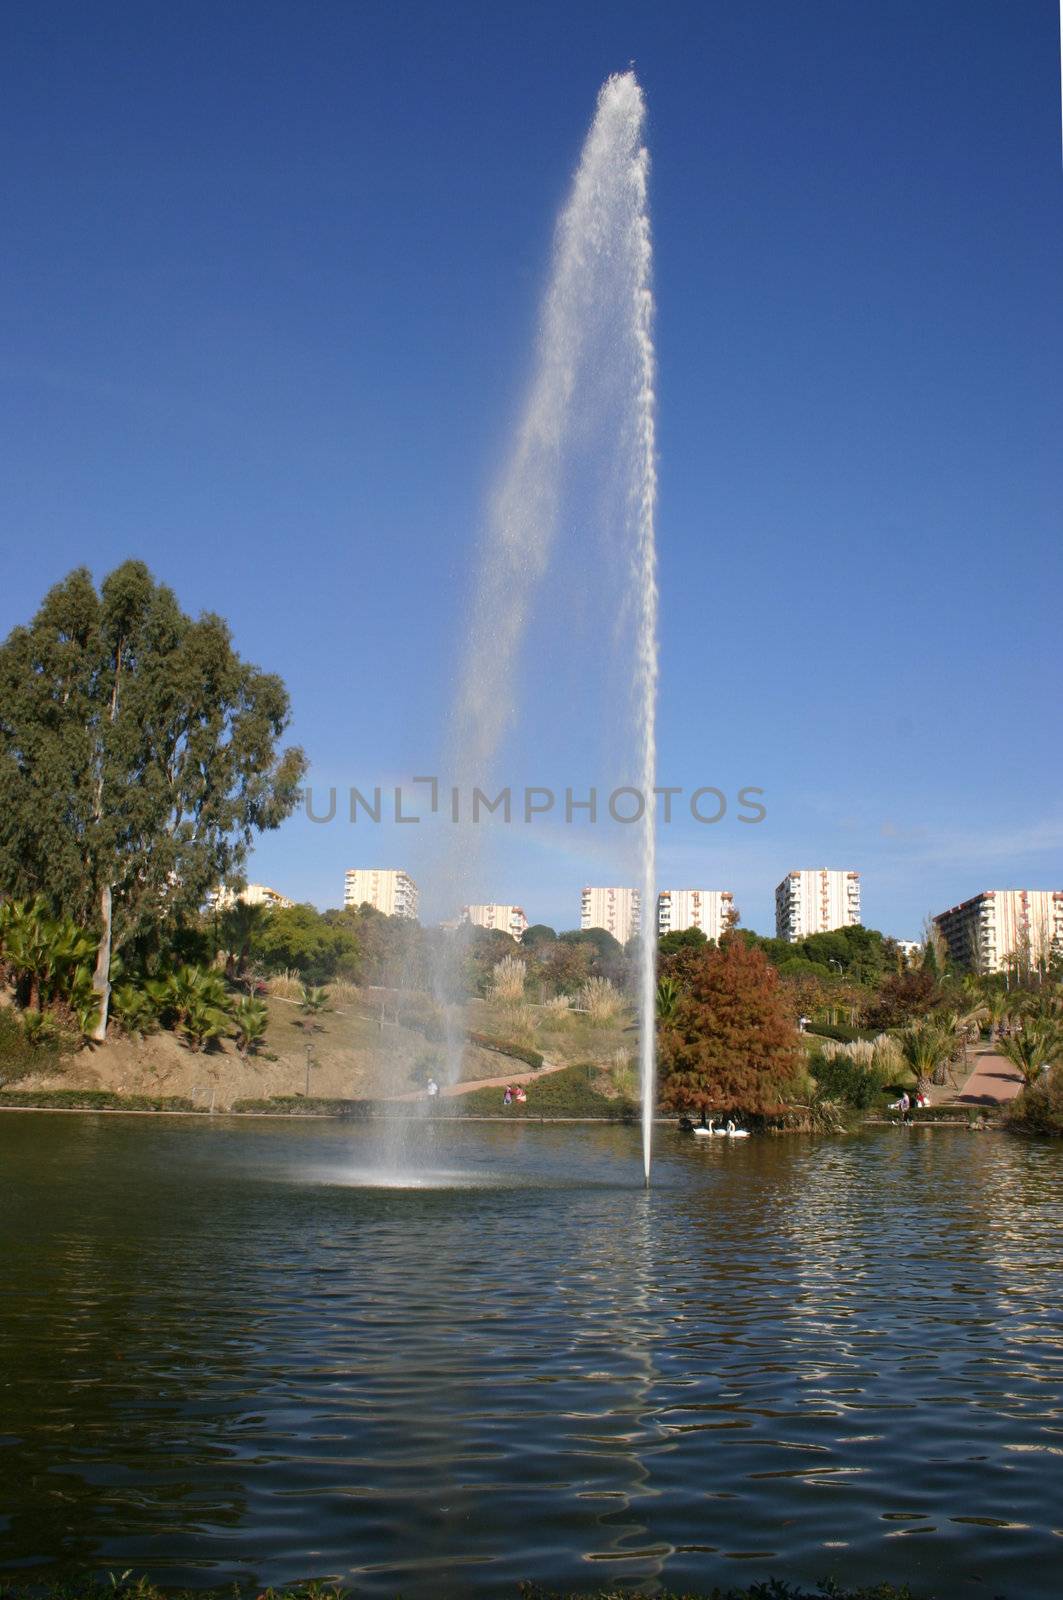 large water fountain in the centre of a lake